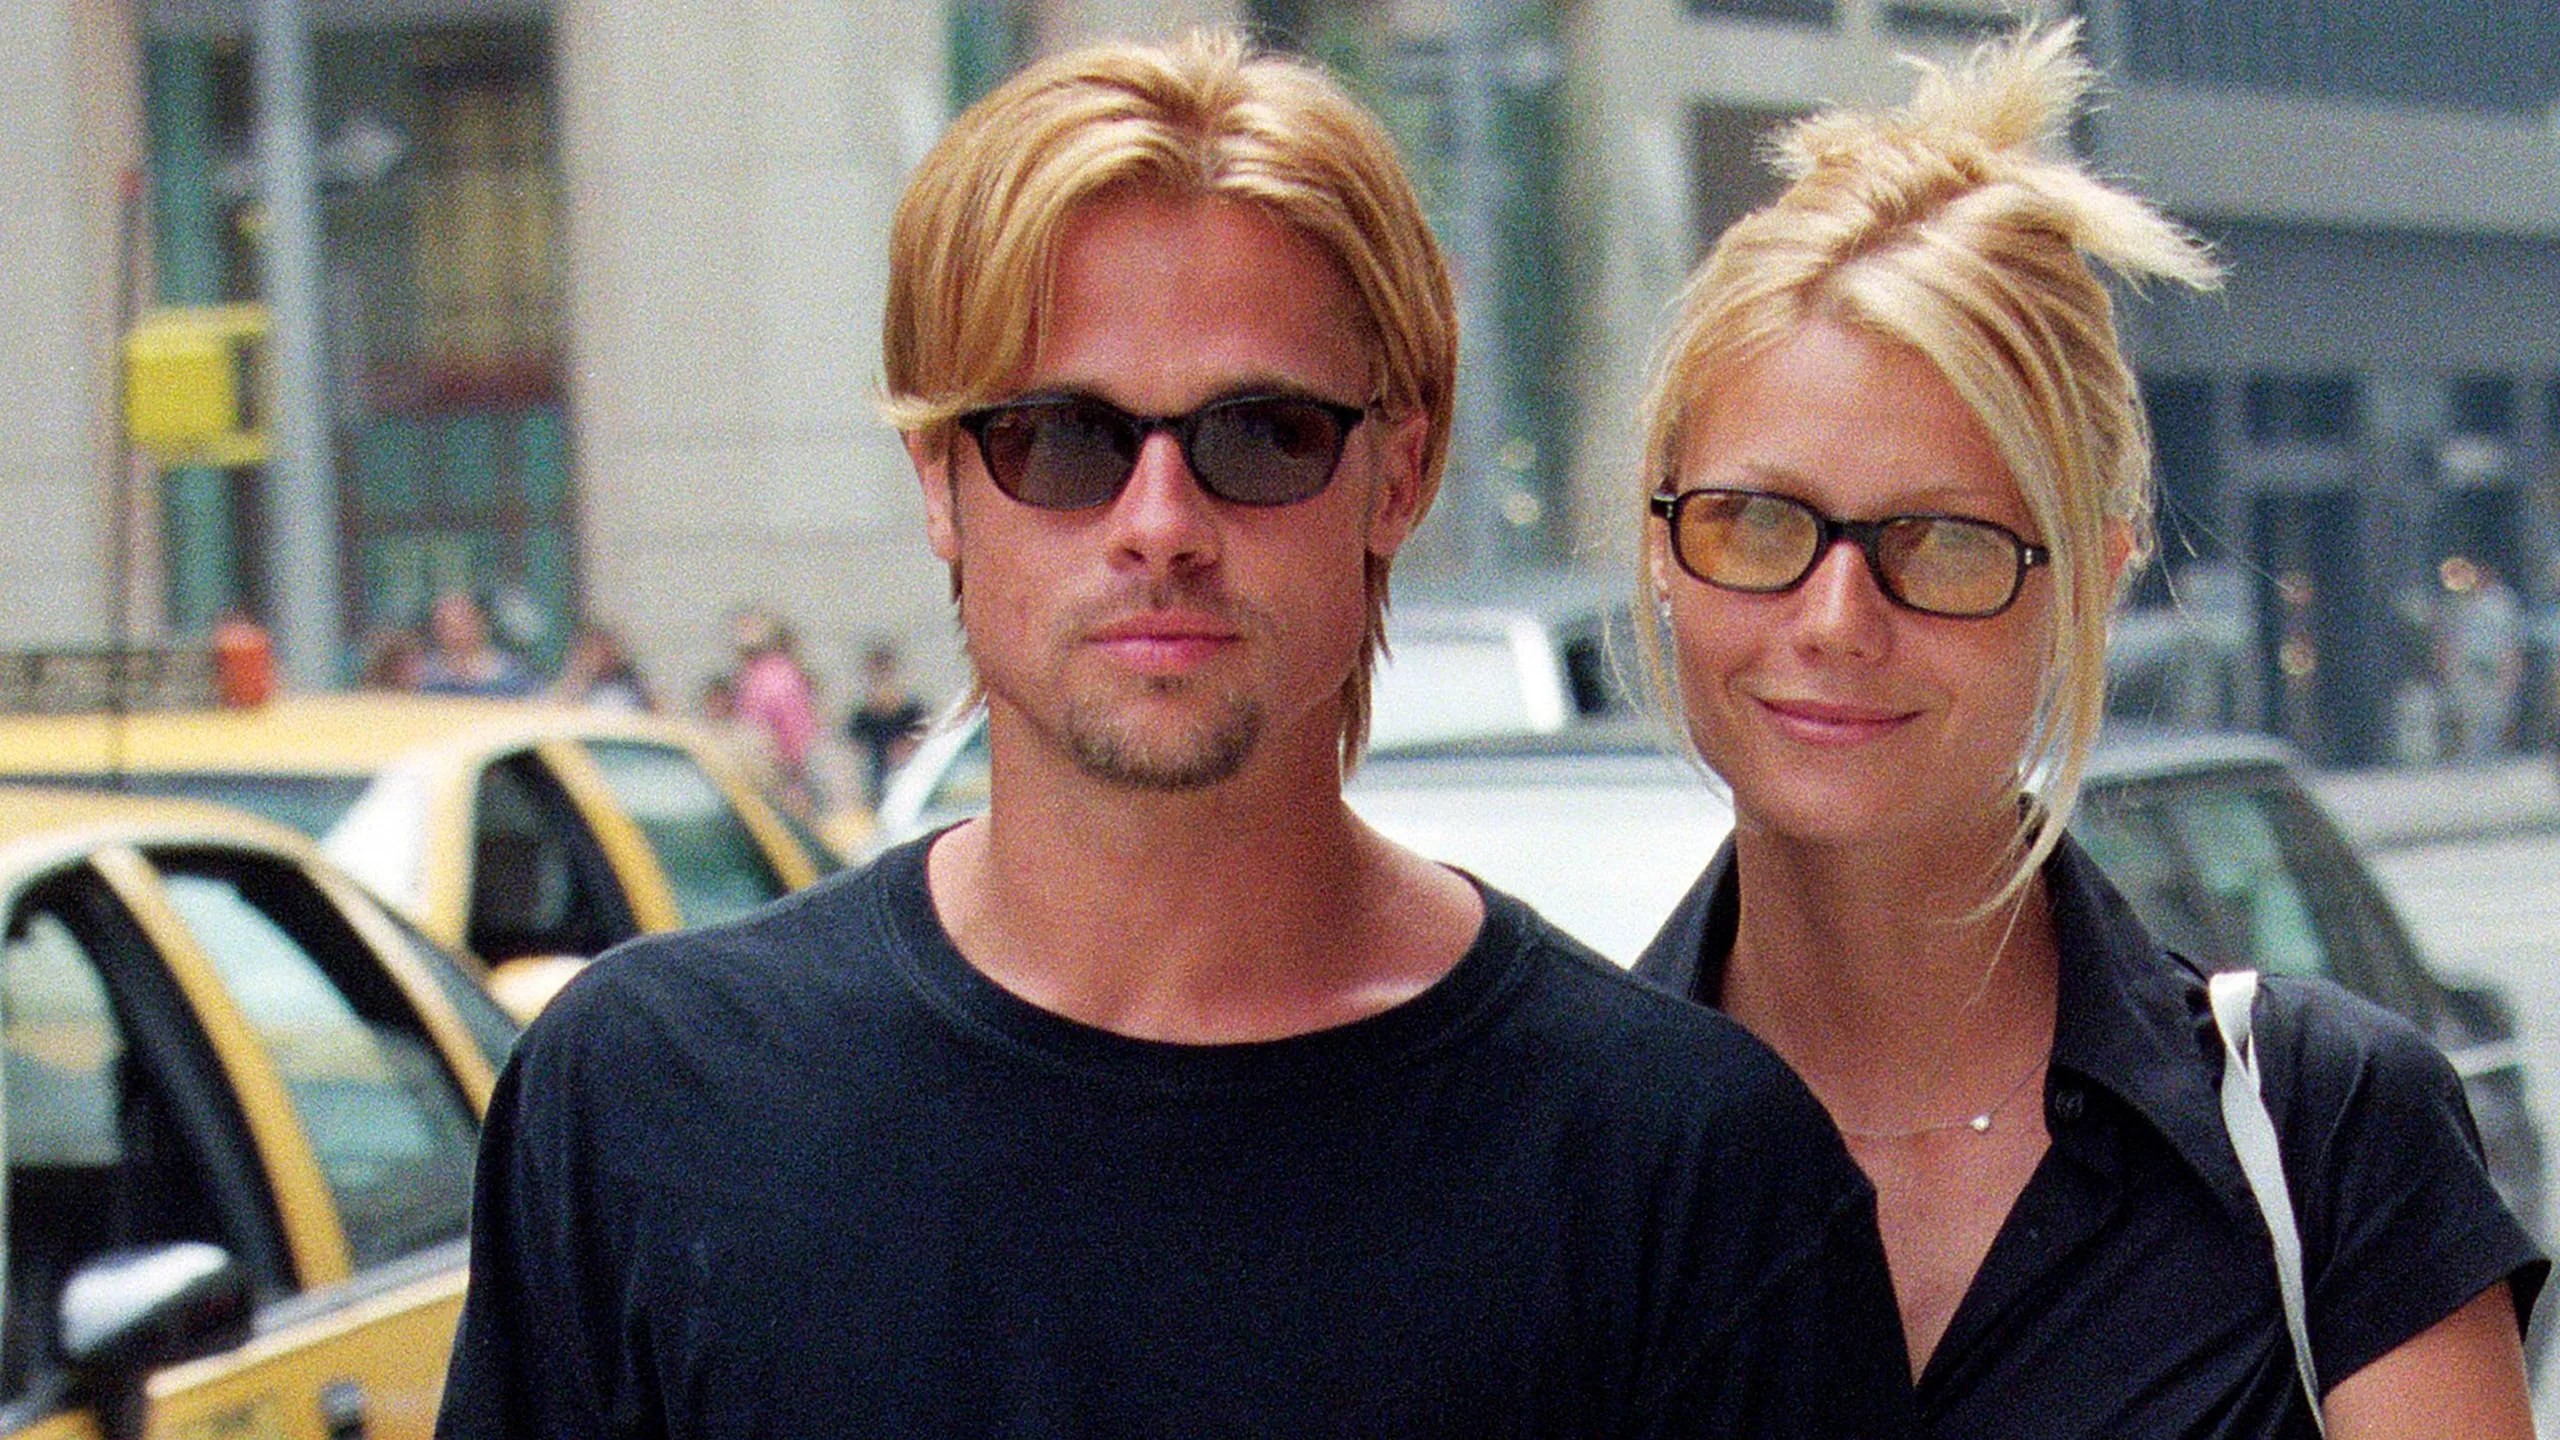 Paltrow and Brad Pitt still love each other 25 years after